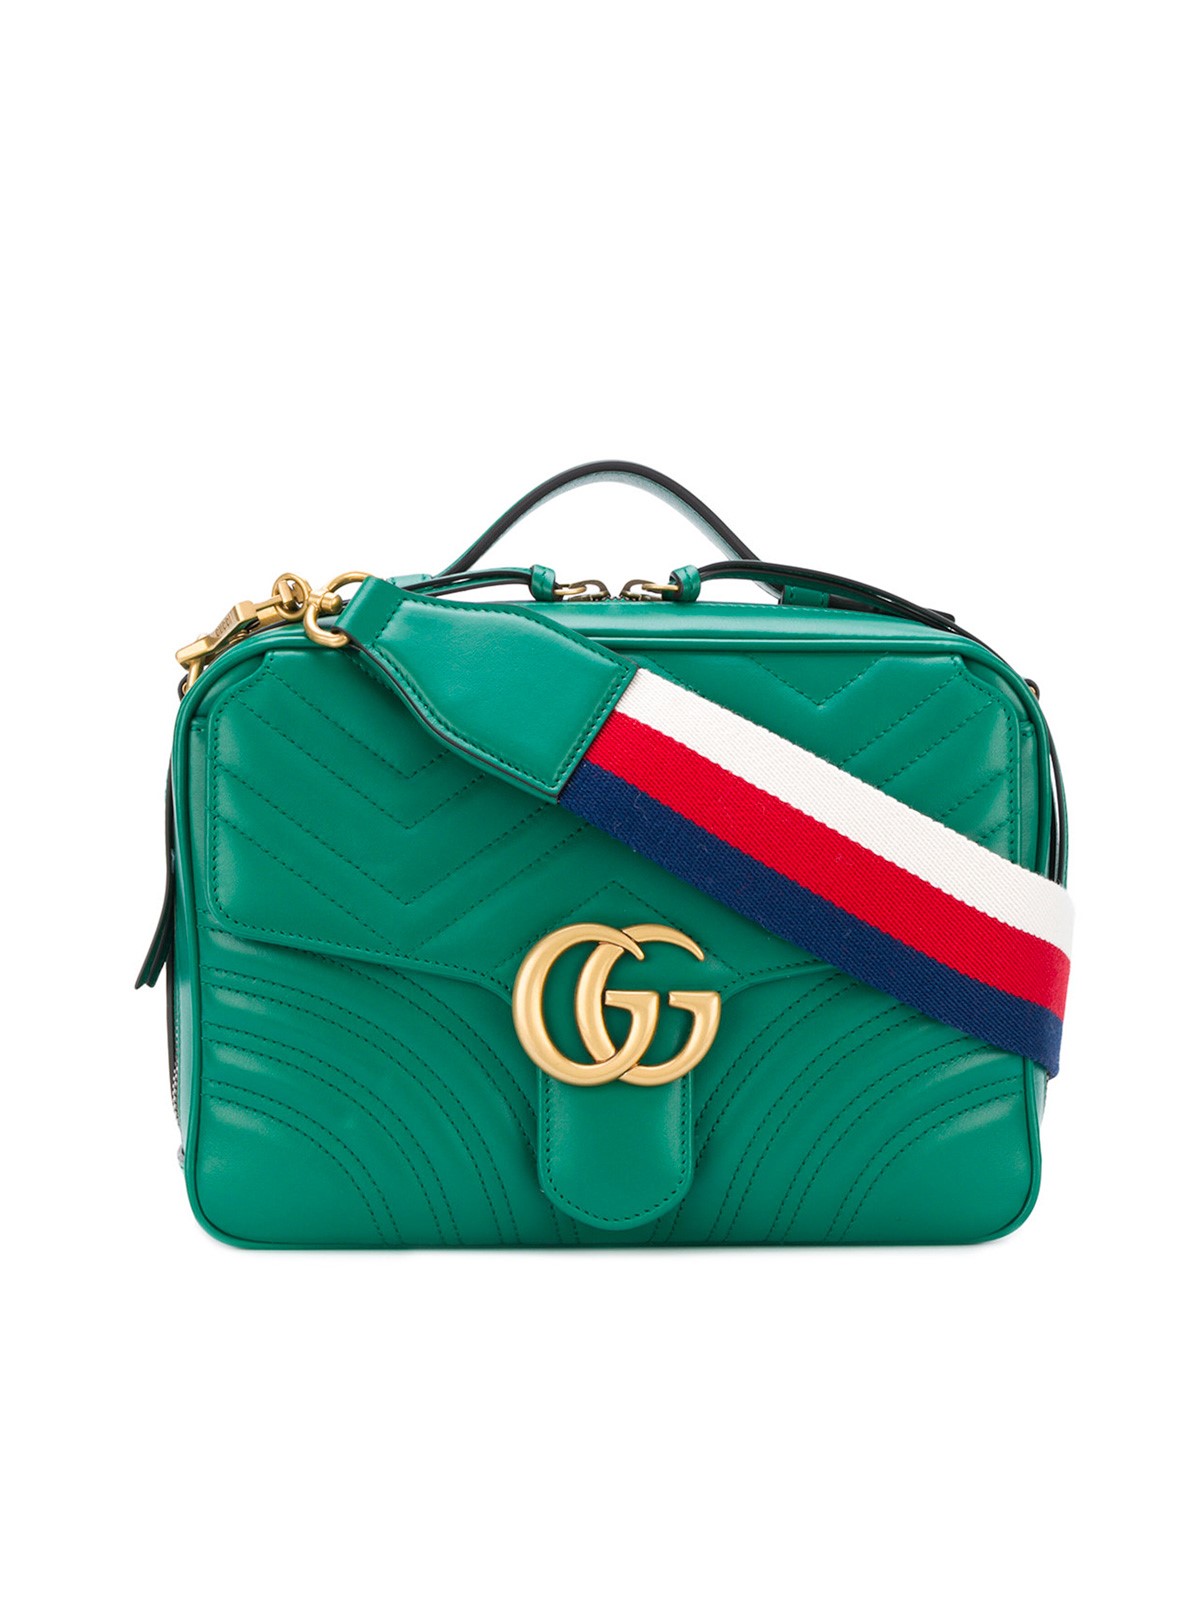 gucci GG MARMONT SHOULDER BAG available on 0 - 21477